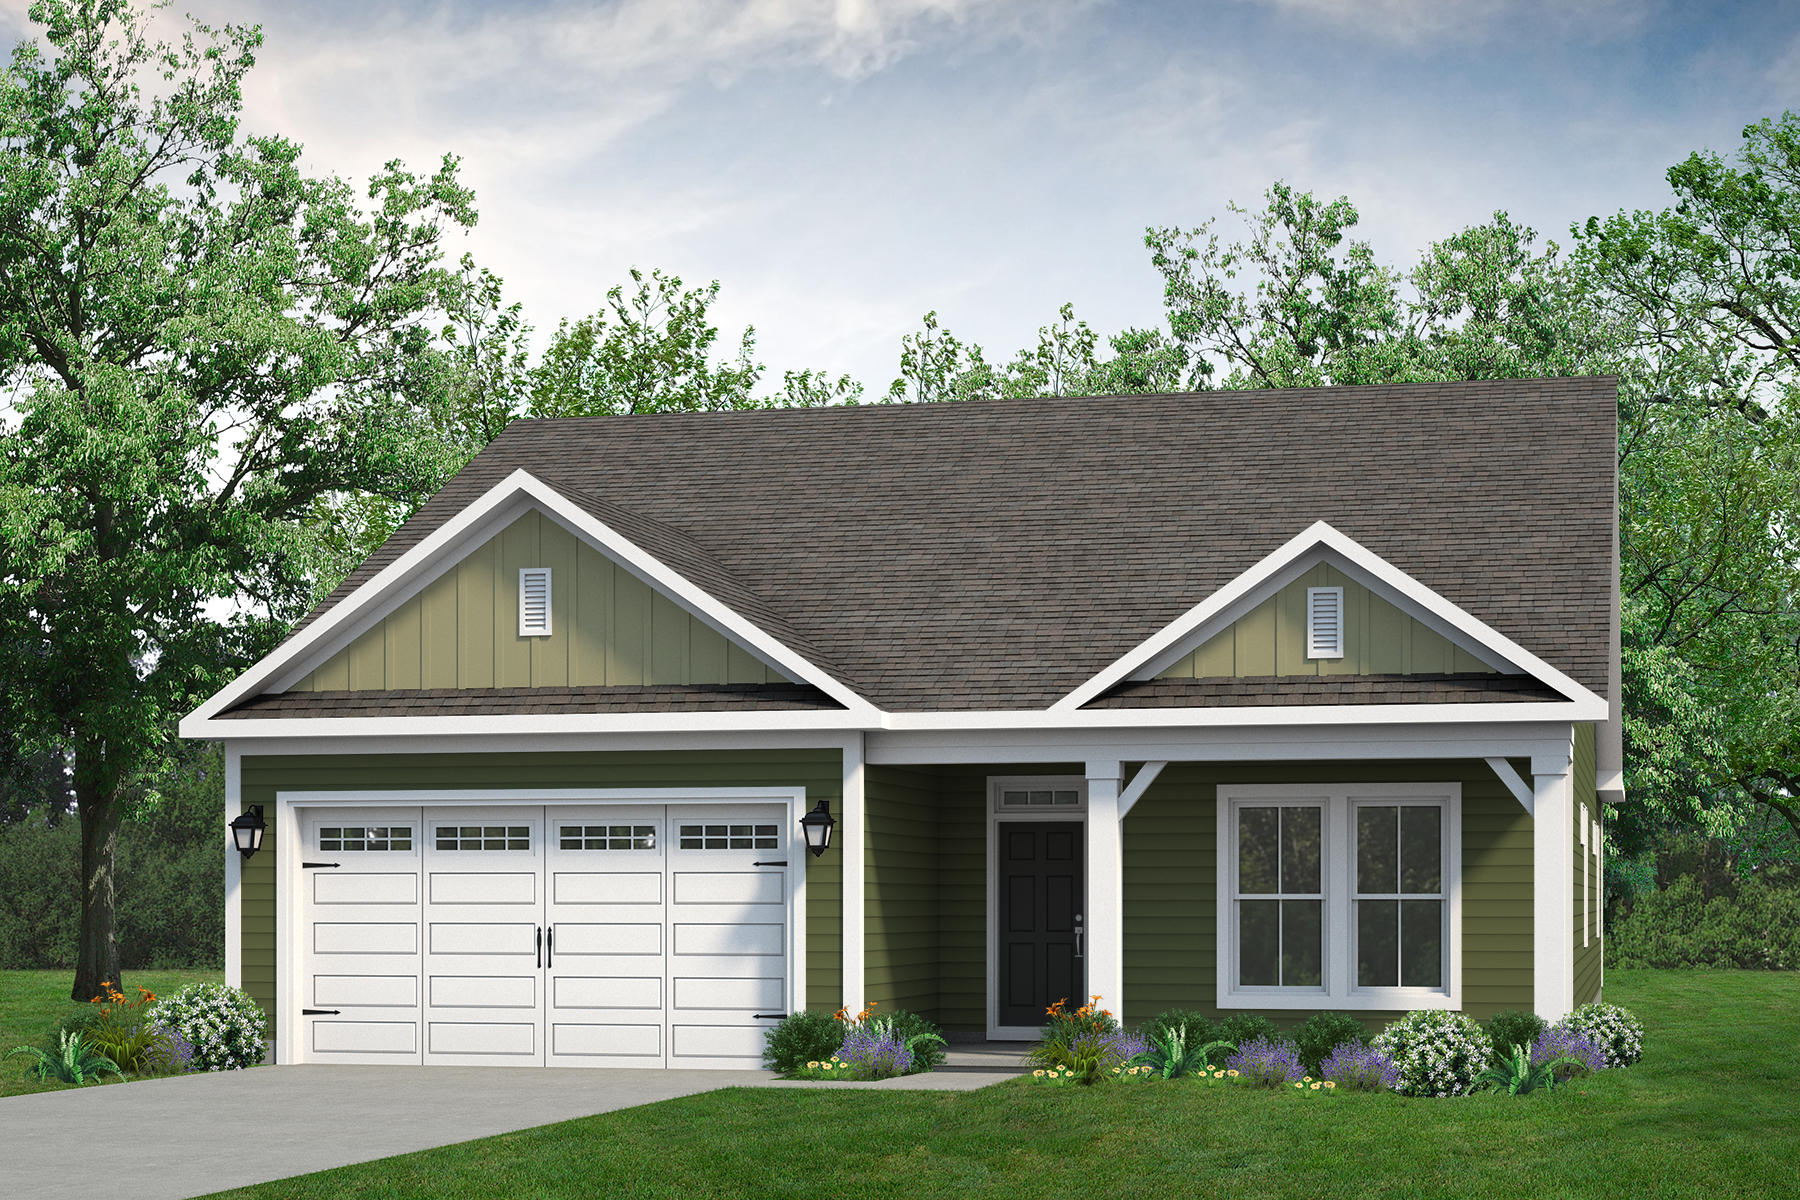 Elevation B. 2,030sf New Home in Bolivia, NC